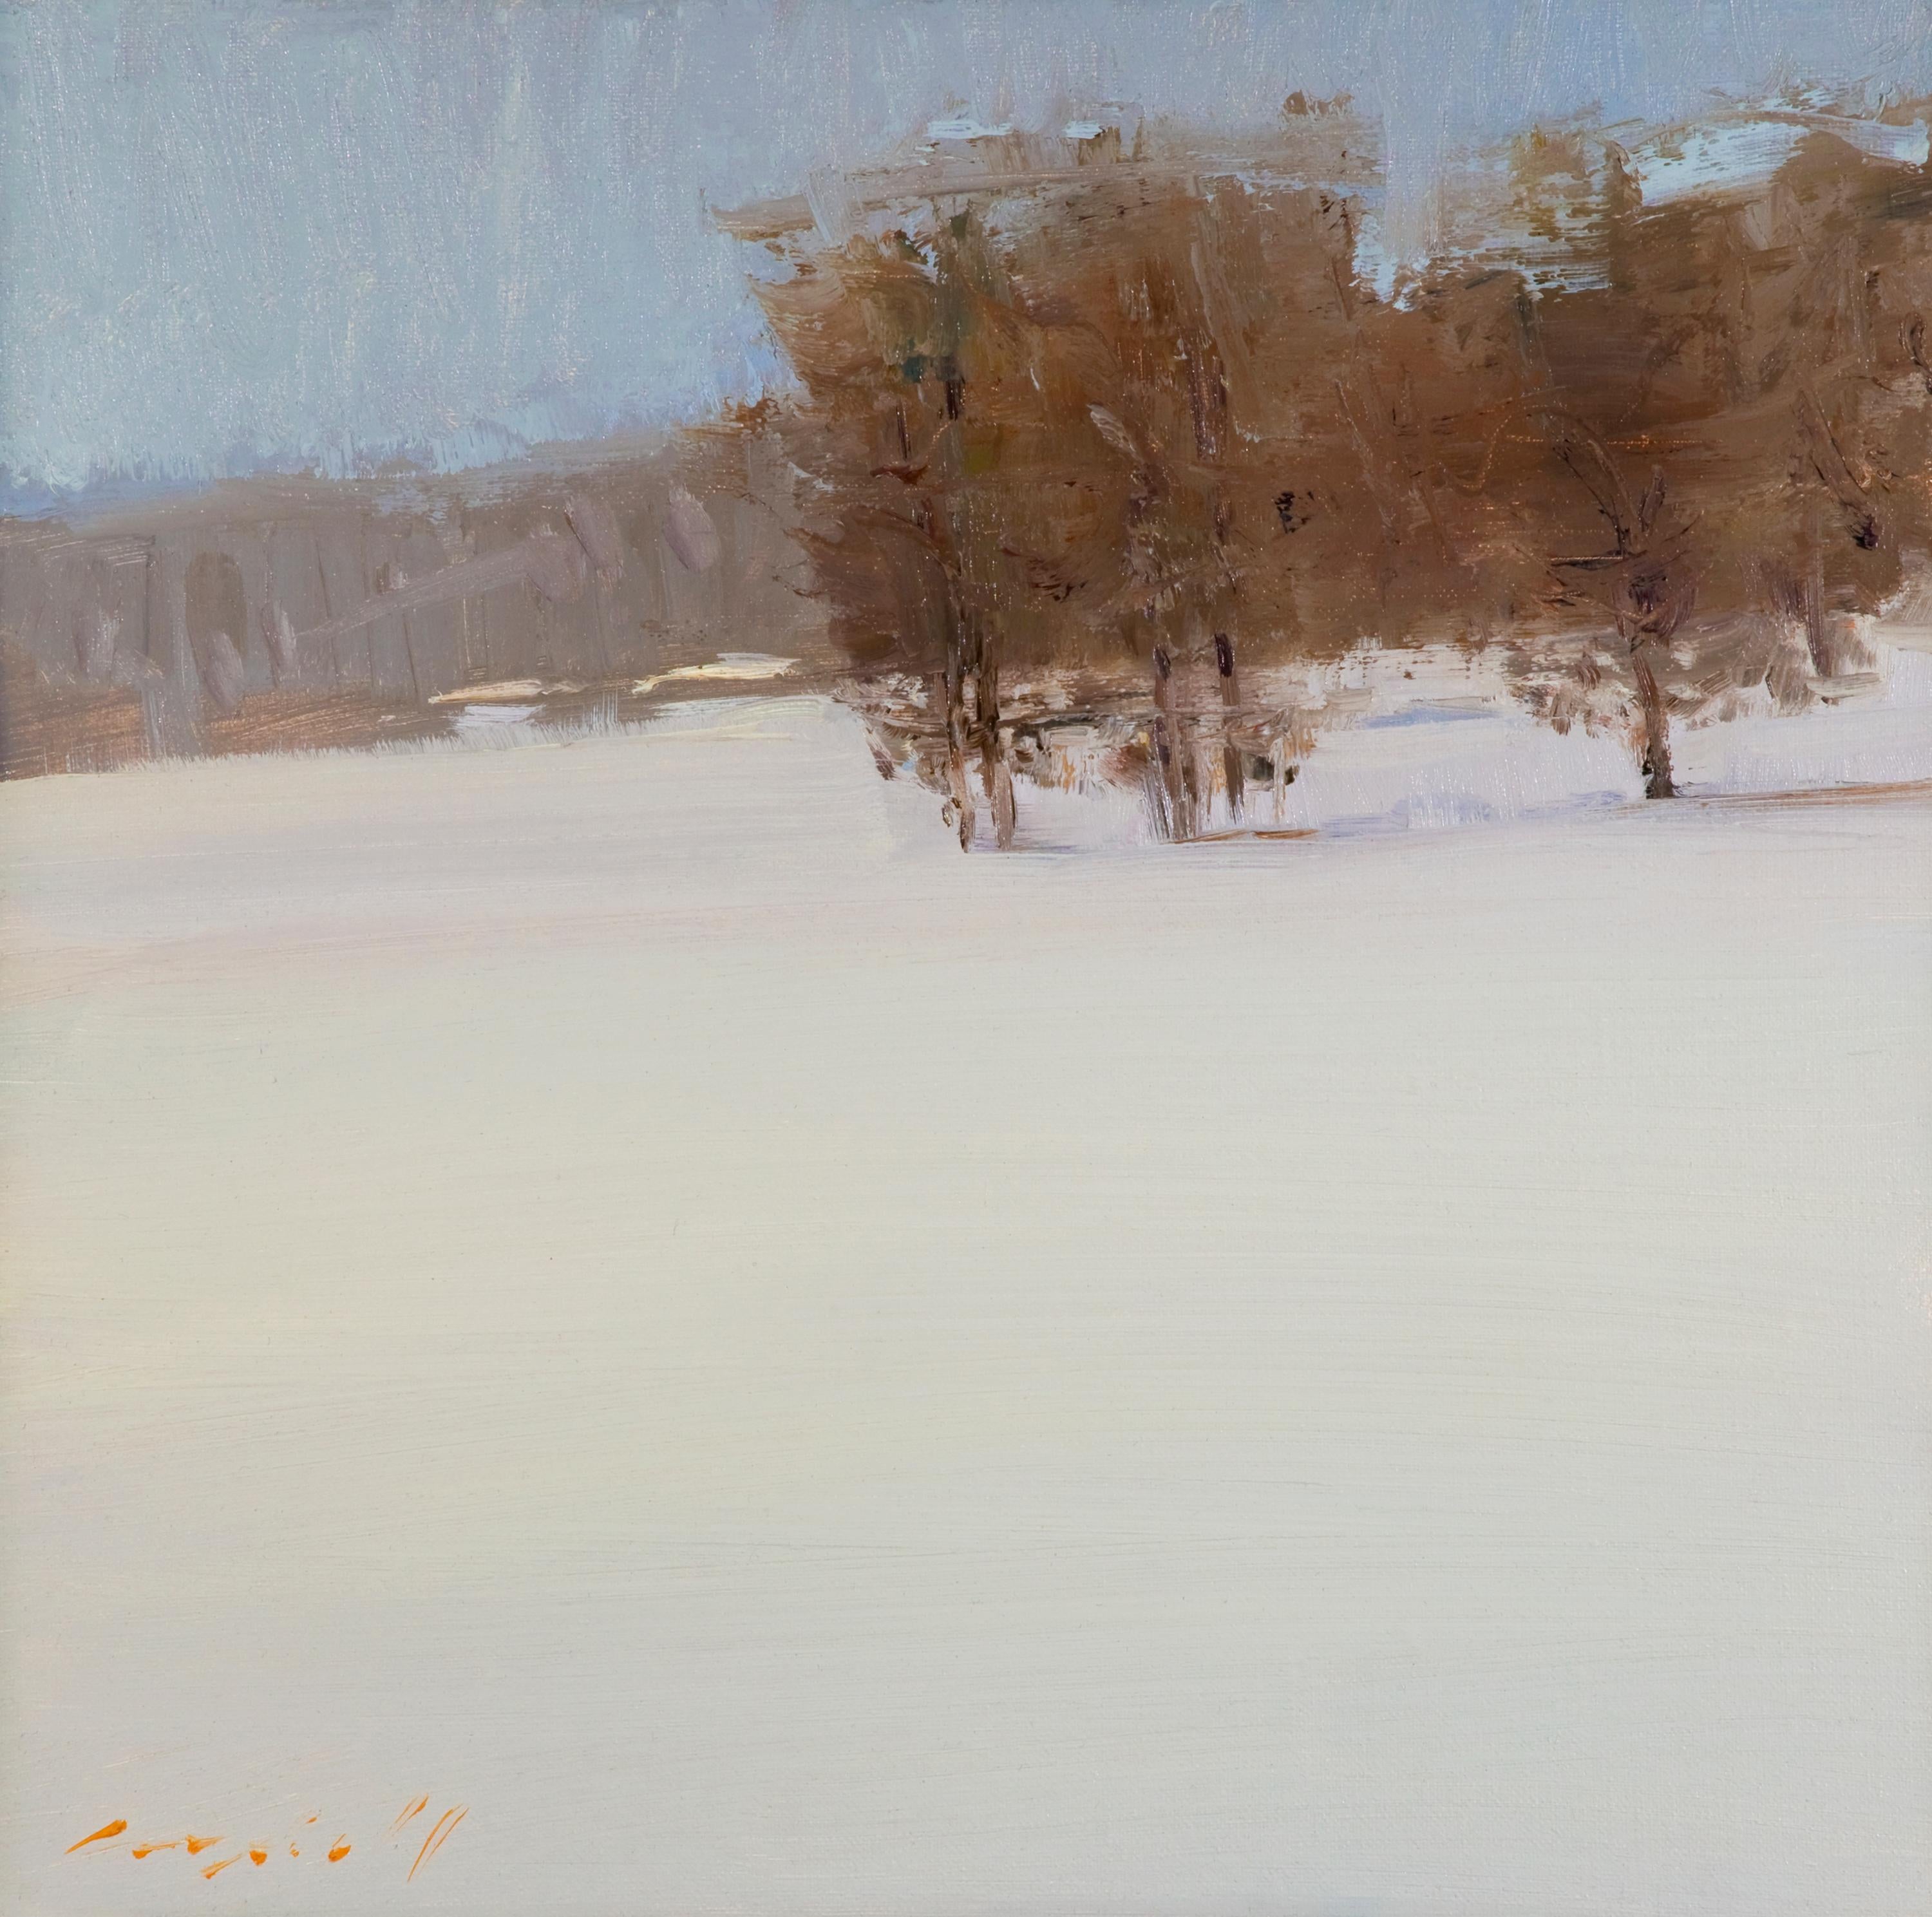 Peter Campbell Landscape Painting - Winter Silence (landscape, winter, snow, field)